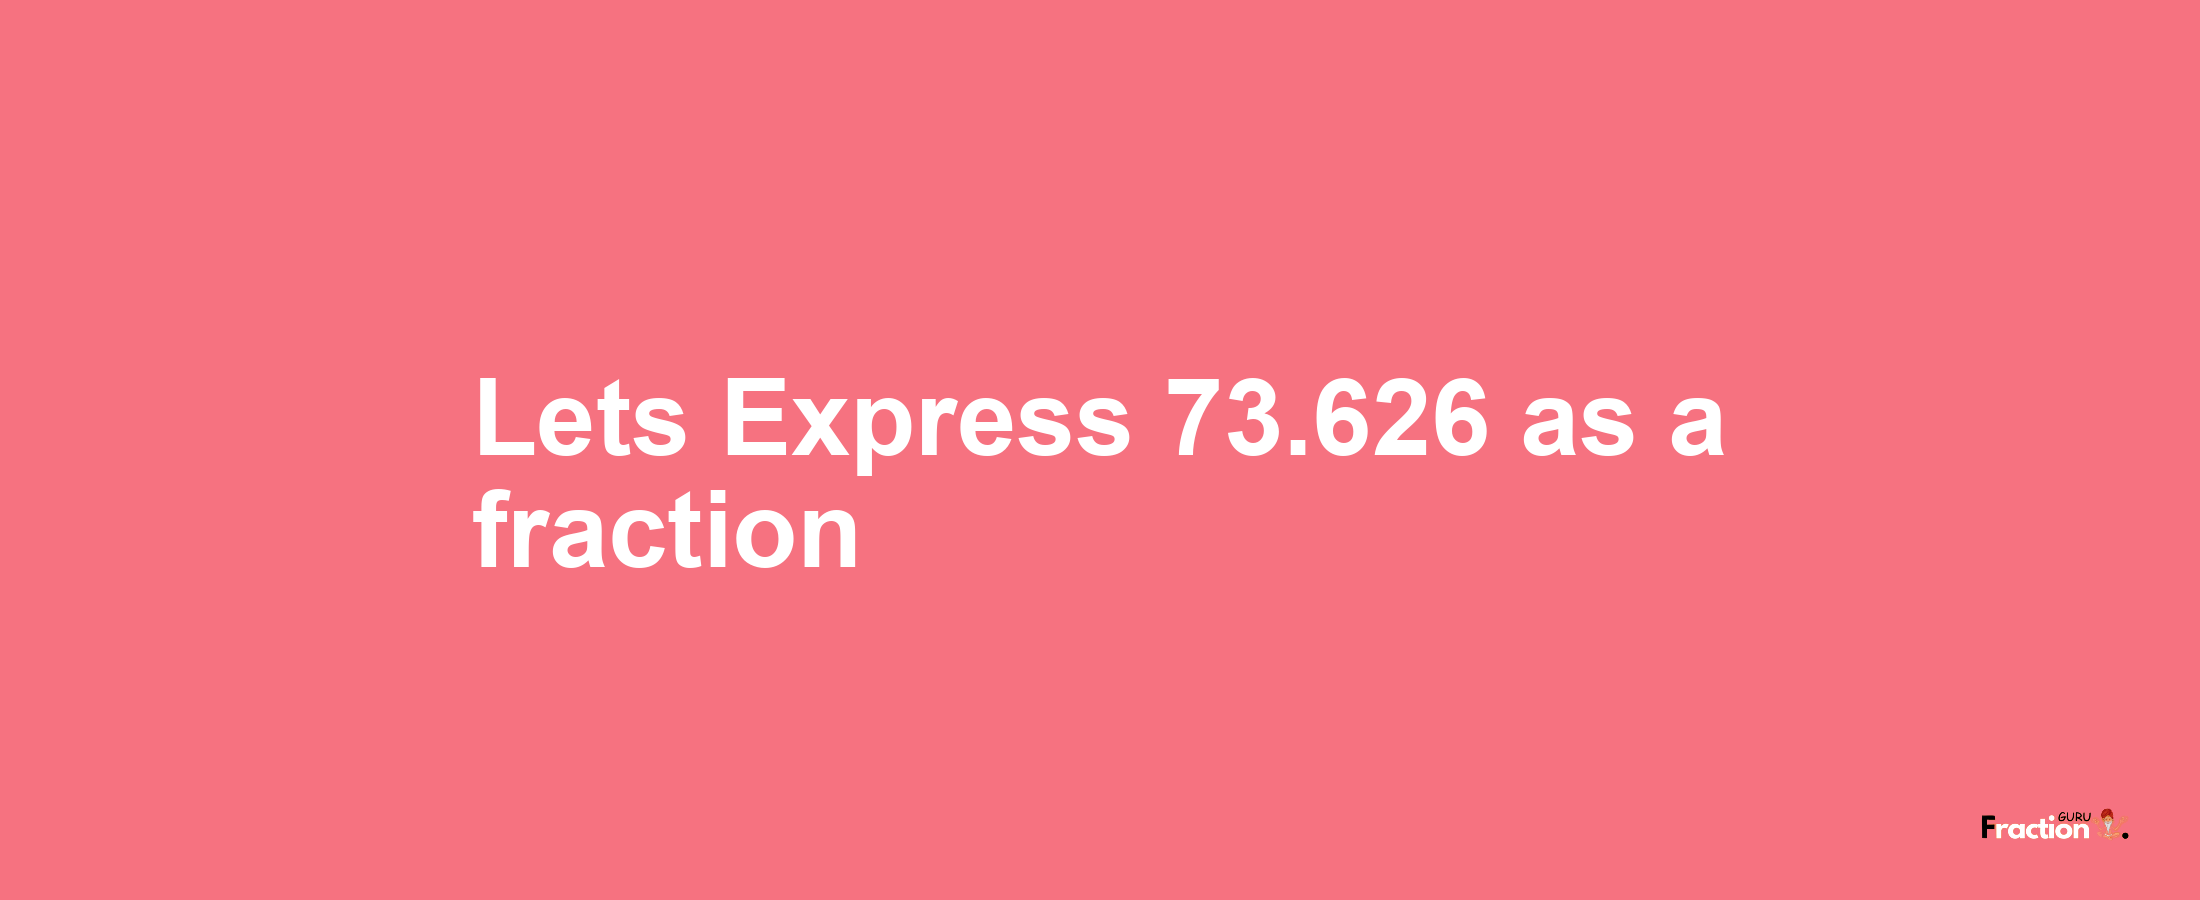 Lets Express 73.626 as afraction